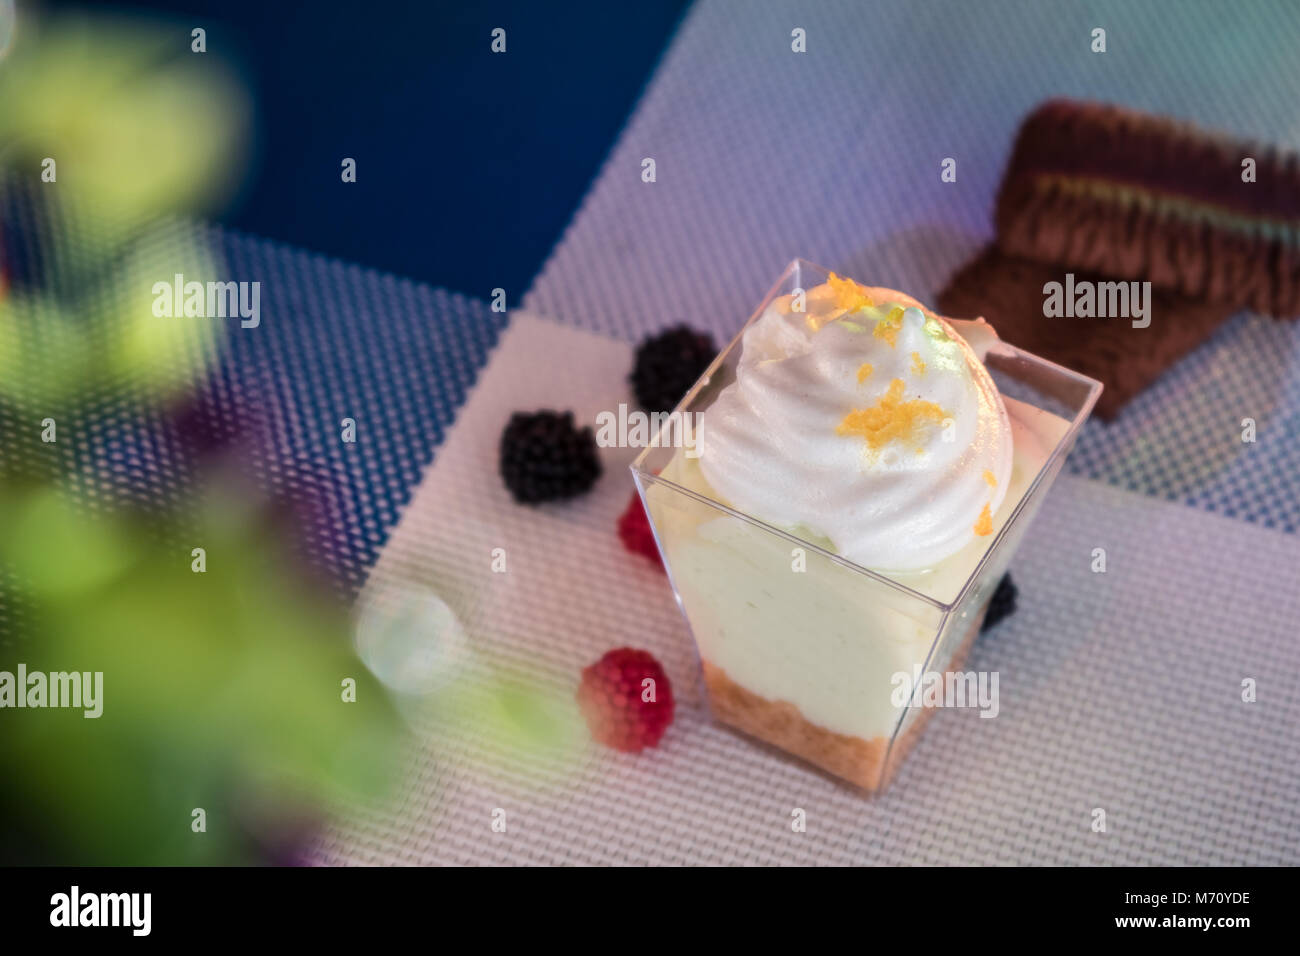 Mini Lemon pie with chocolate cookies and berries in a beautiful blue checkered tablecloth Stock Photo